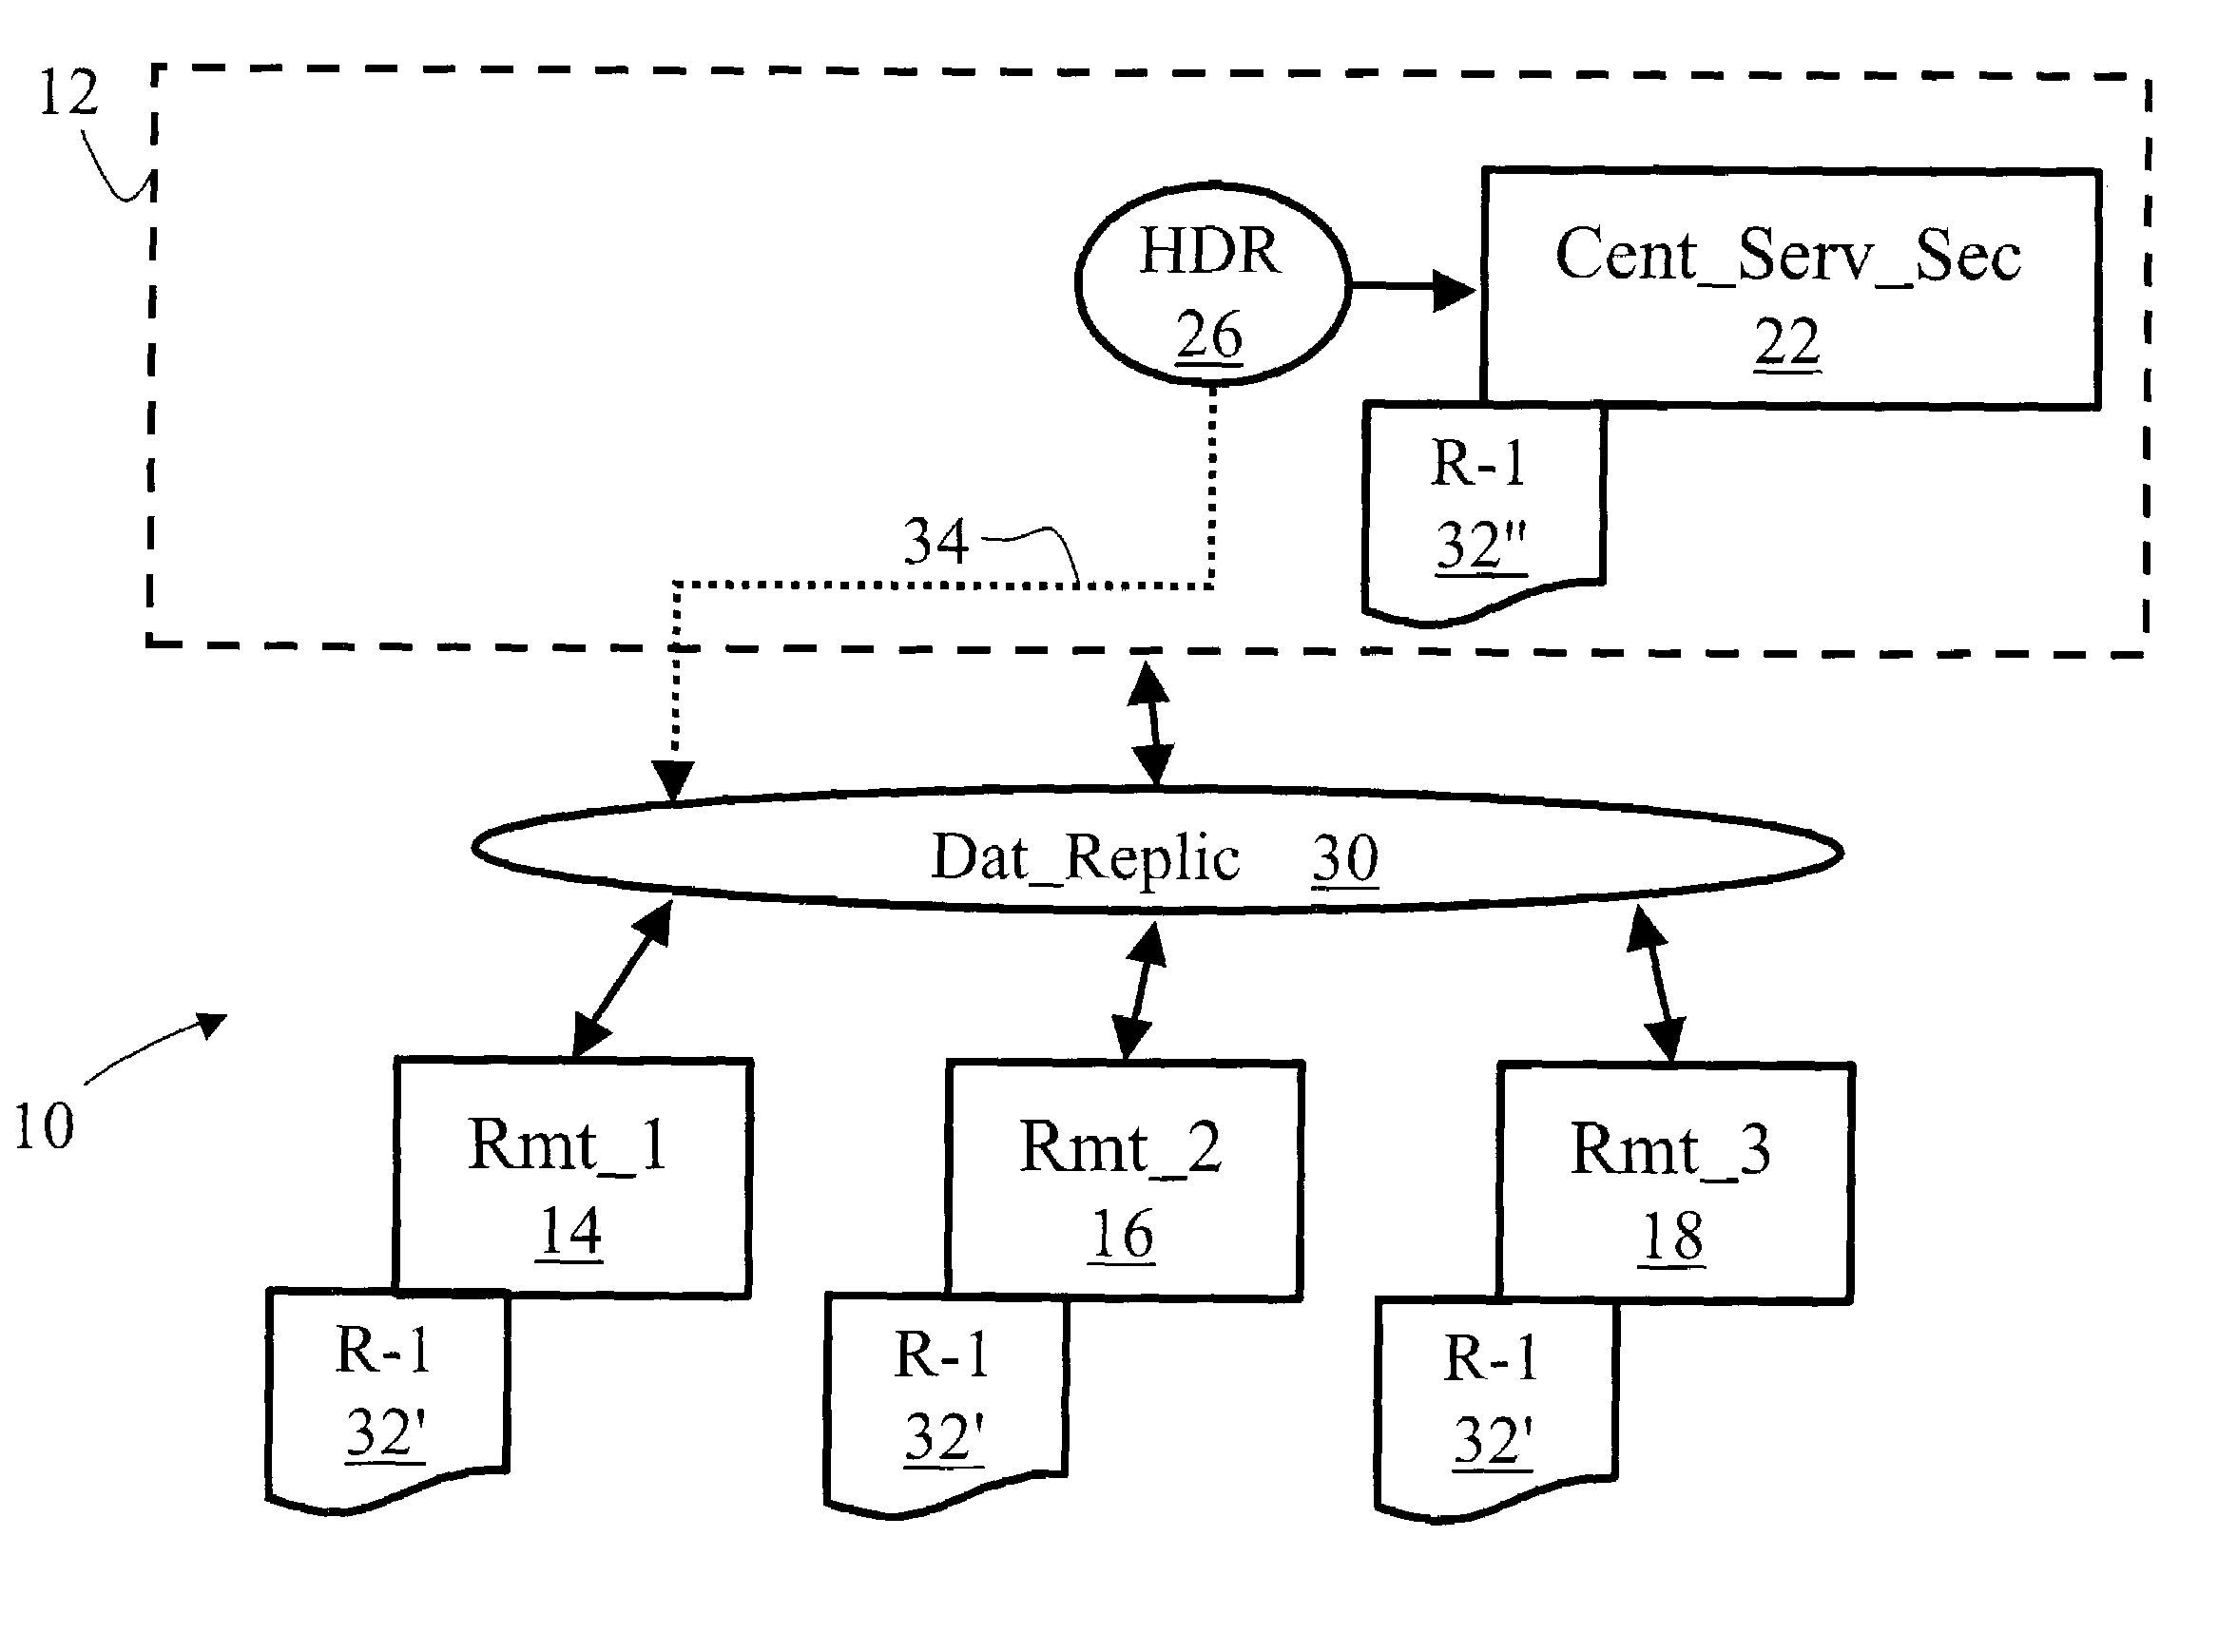 Apparatus and method for coordinating logical data replication with highly available data replication